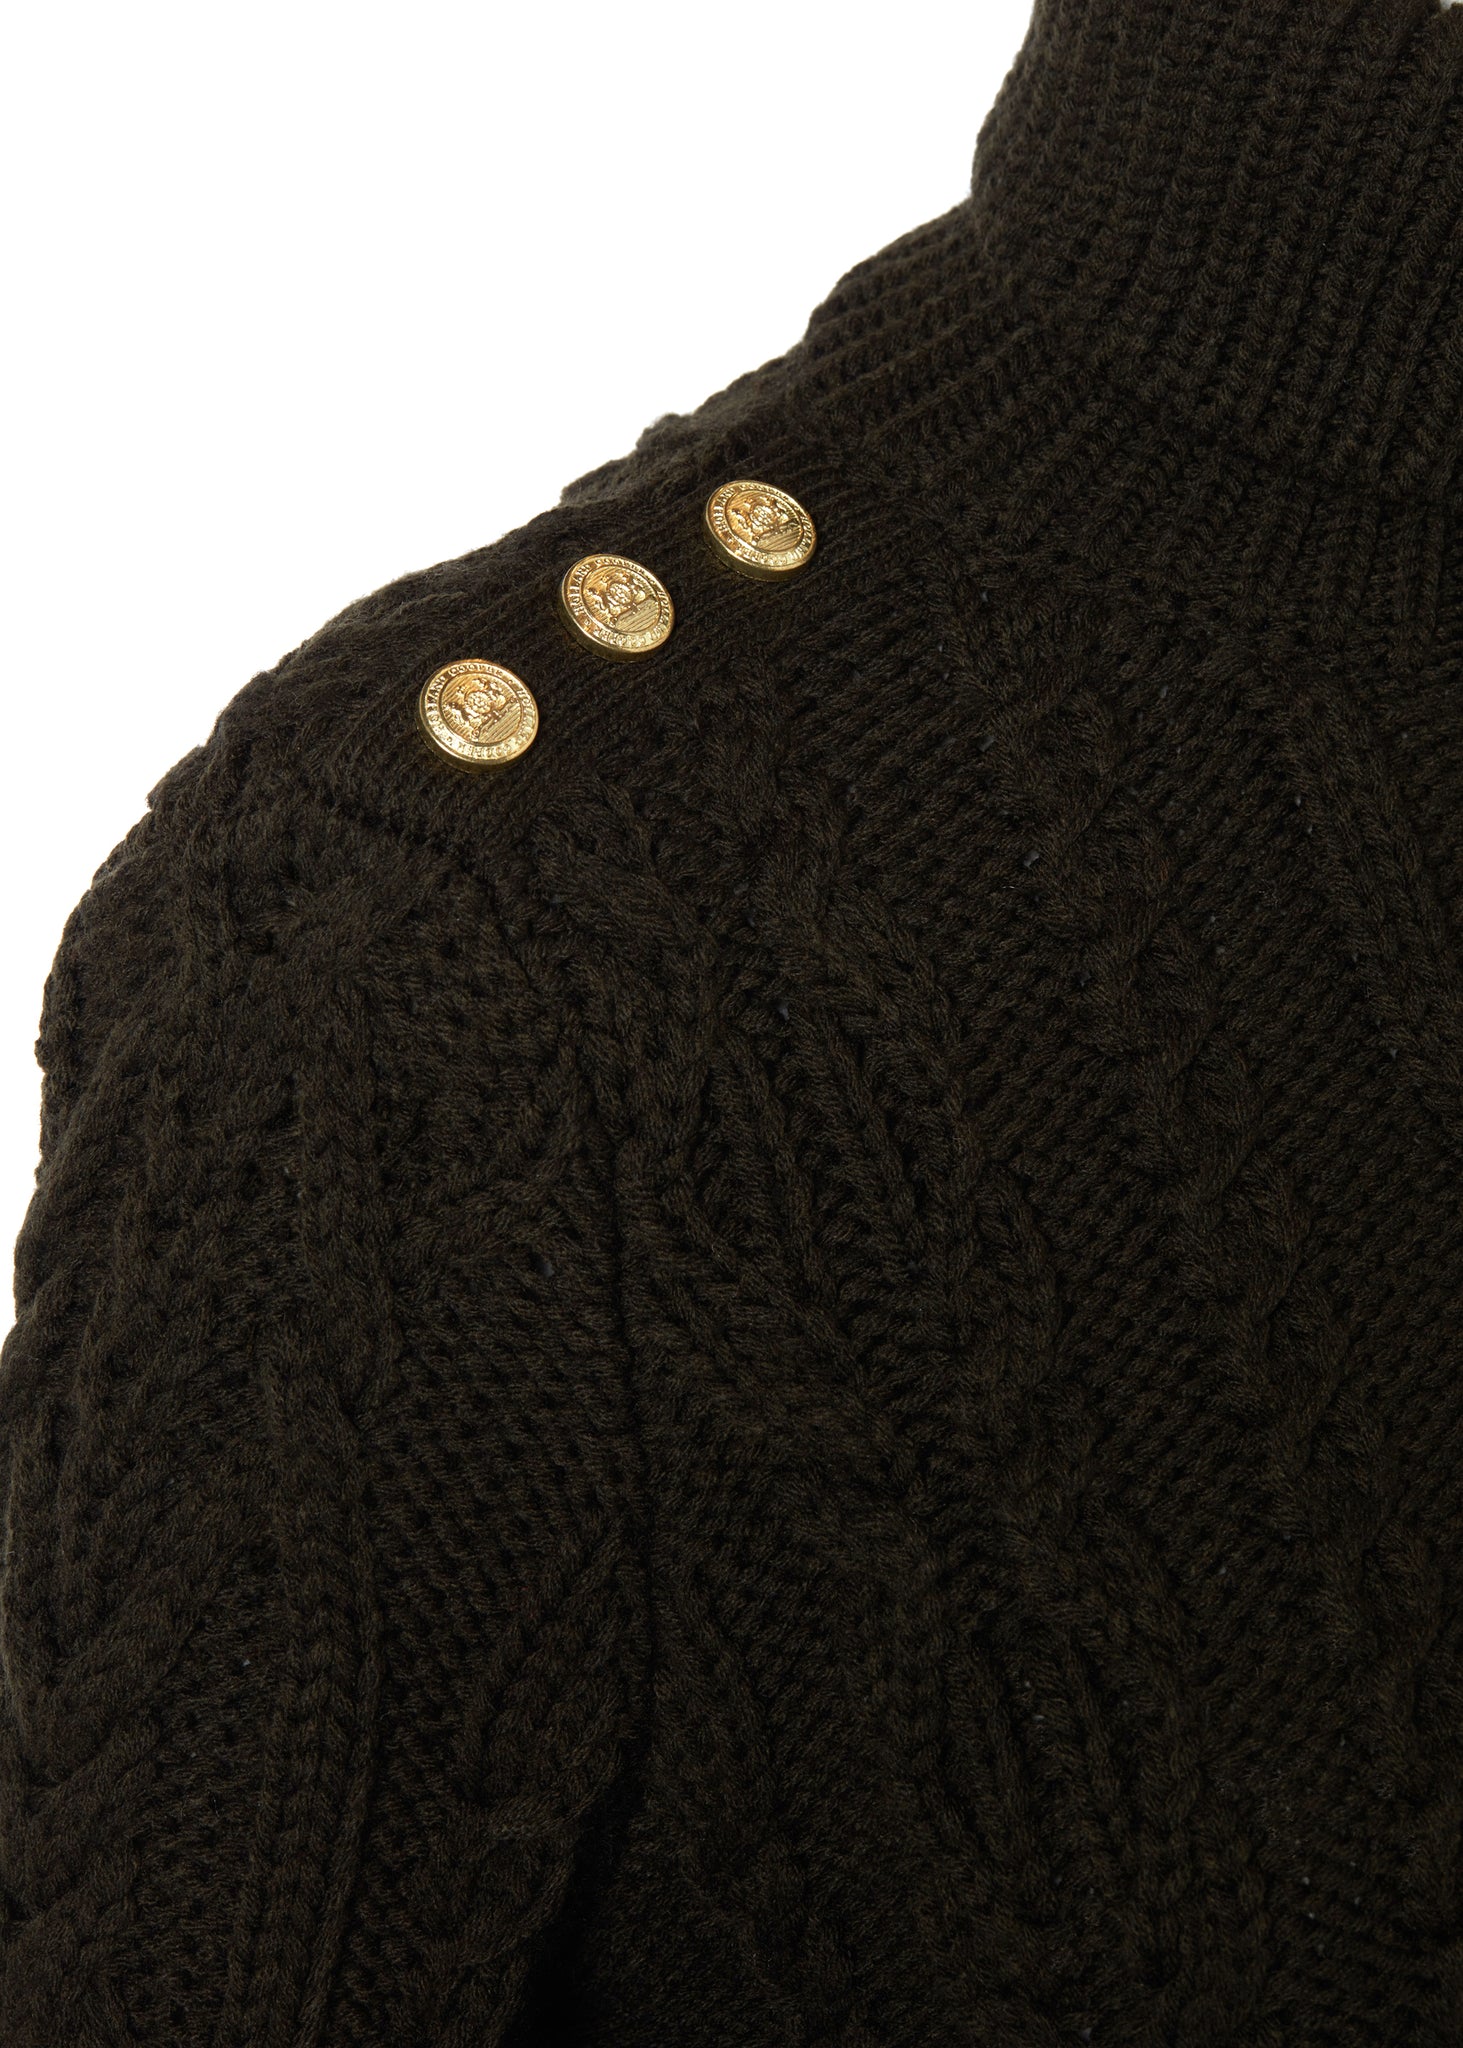 gold button detail across shoulders of a chunky cable knit roll neck jumper in fern green with dropped shoulders and thick ribbed cable trims and gold buttons on cuffs and collar